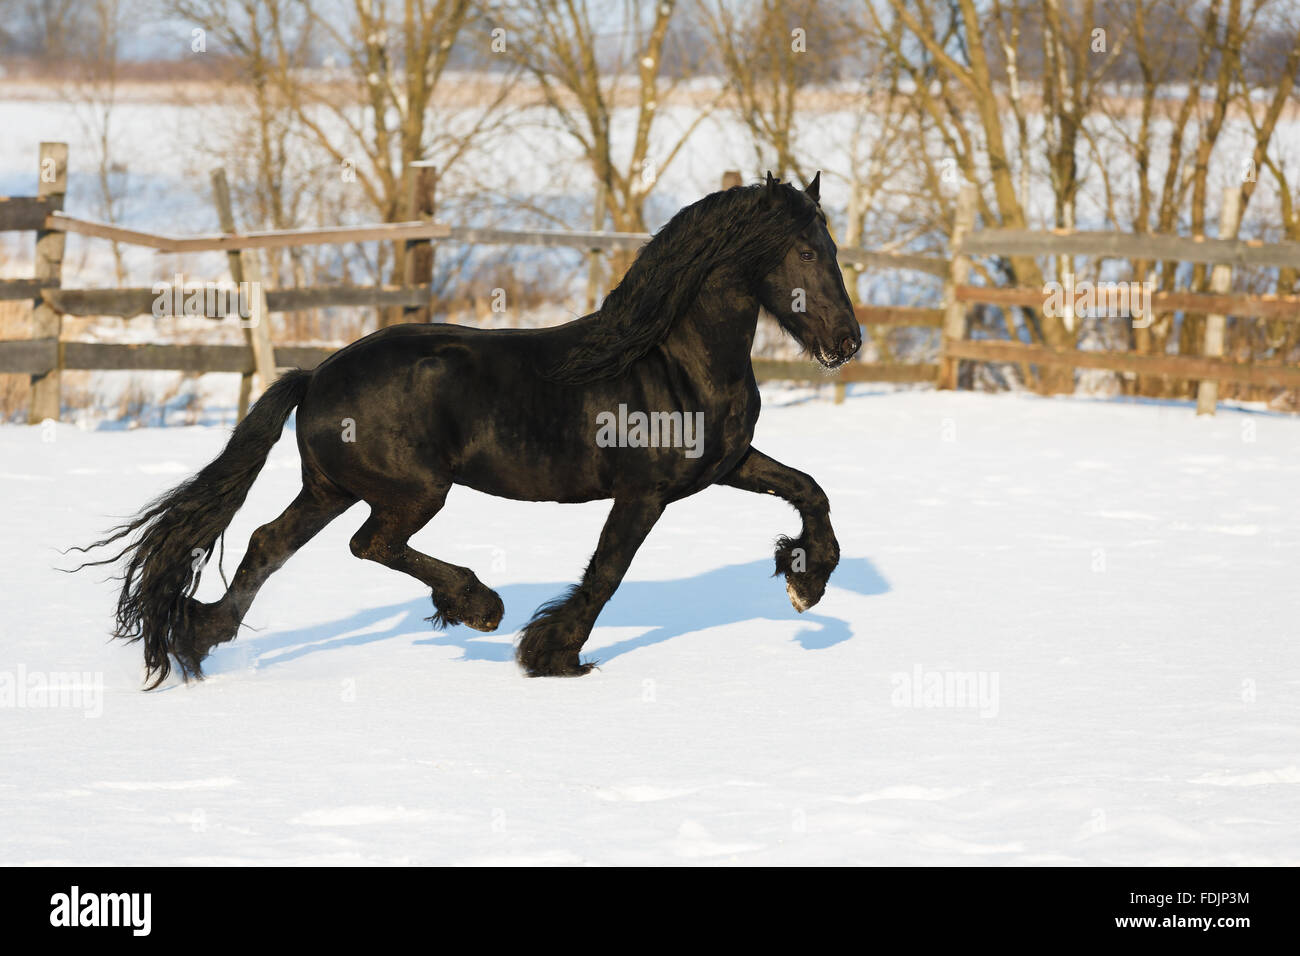 Black frisian horse in the stable at winter time Stock Photo